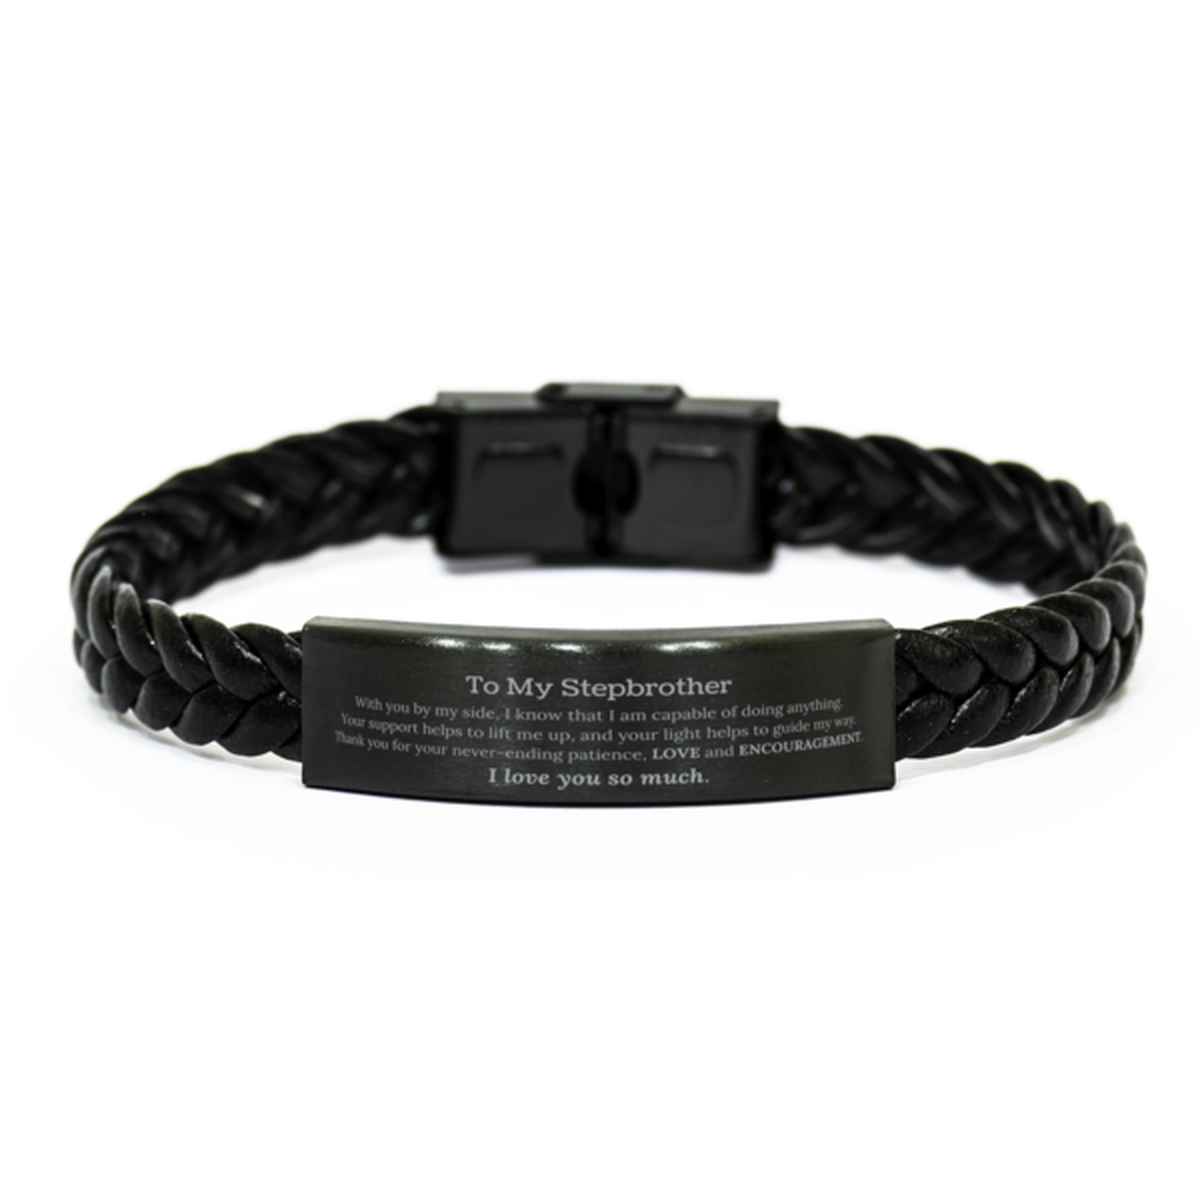 Appreciation Stepbrother Braided Leather Bracelet Gifts, To My Stepbrother Birthday Christmas Wedding Keepsake Gifts for Stepbrother With you by my side, I know that I am capable of doing anything. I love you so much